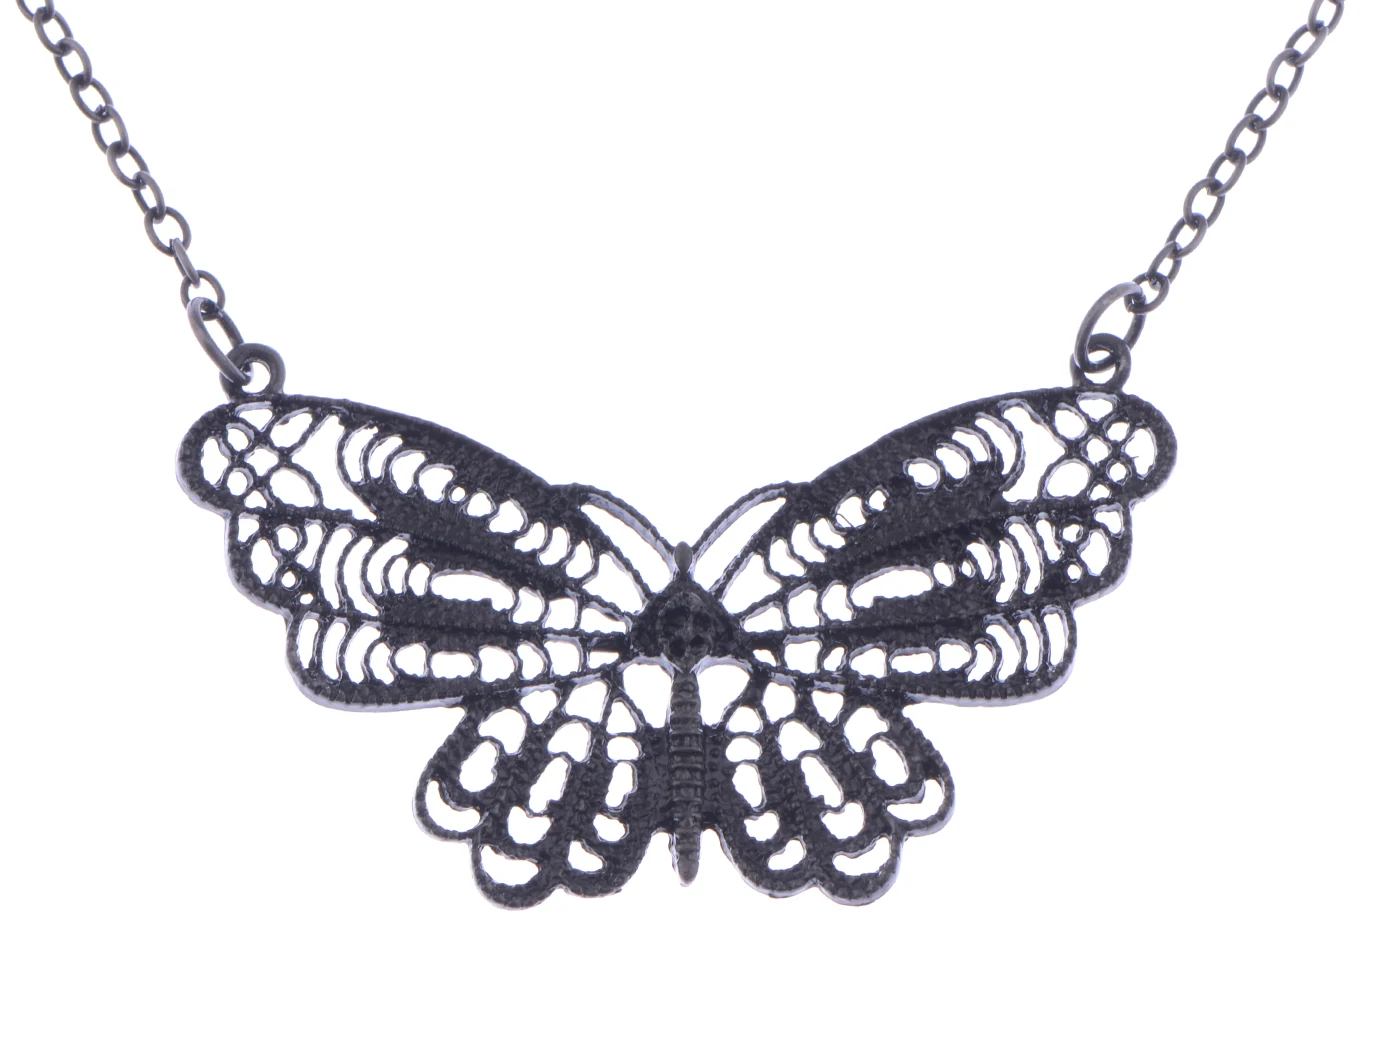 

Antique Silver Toned Metallic Filigree Butterfly Insect Pendant Art Deco Costume Necklace